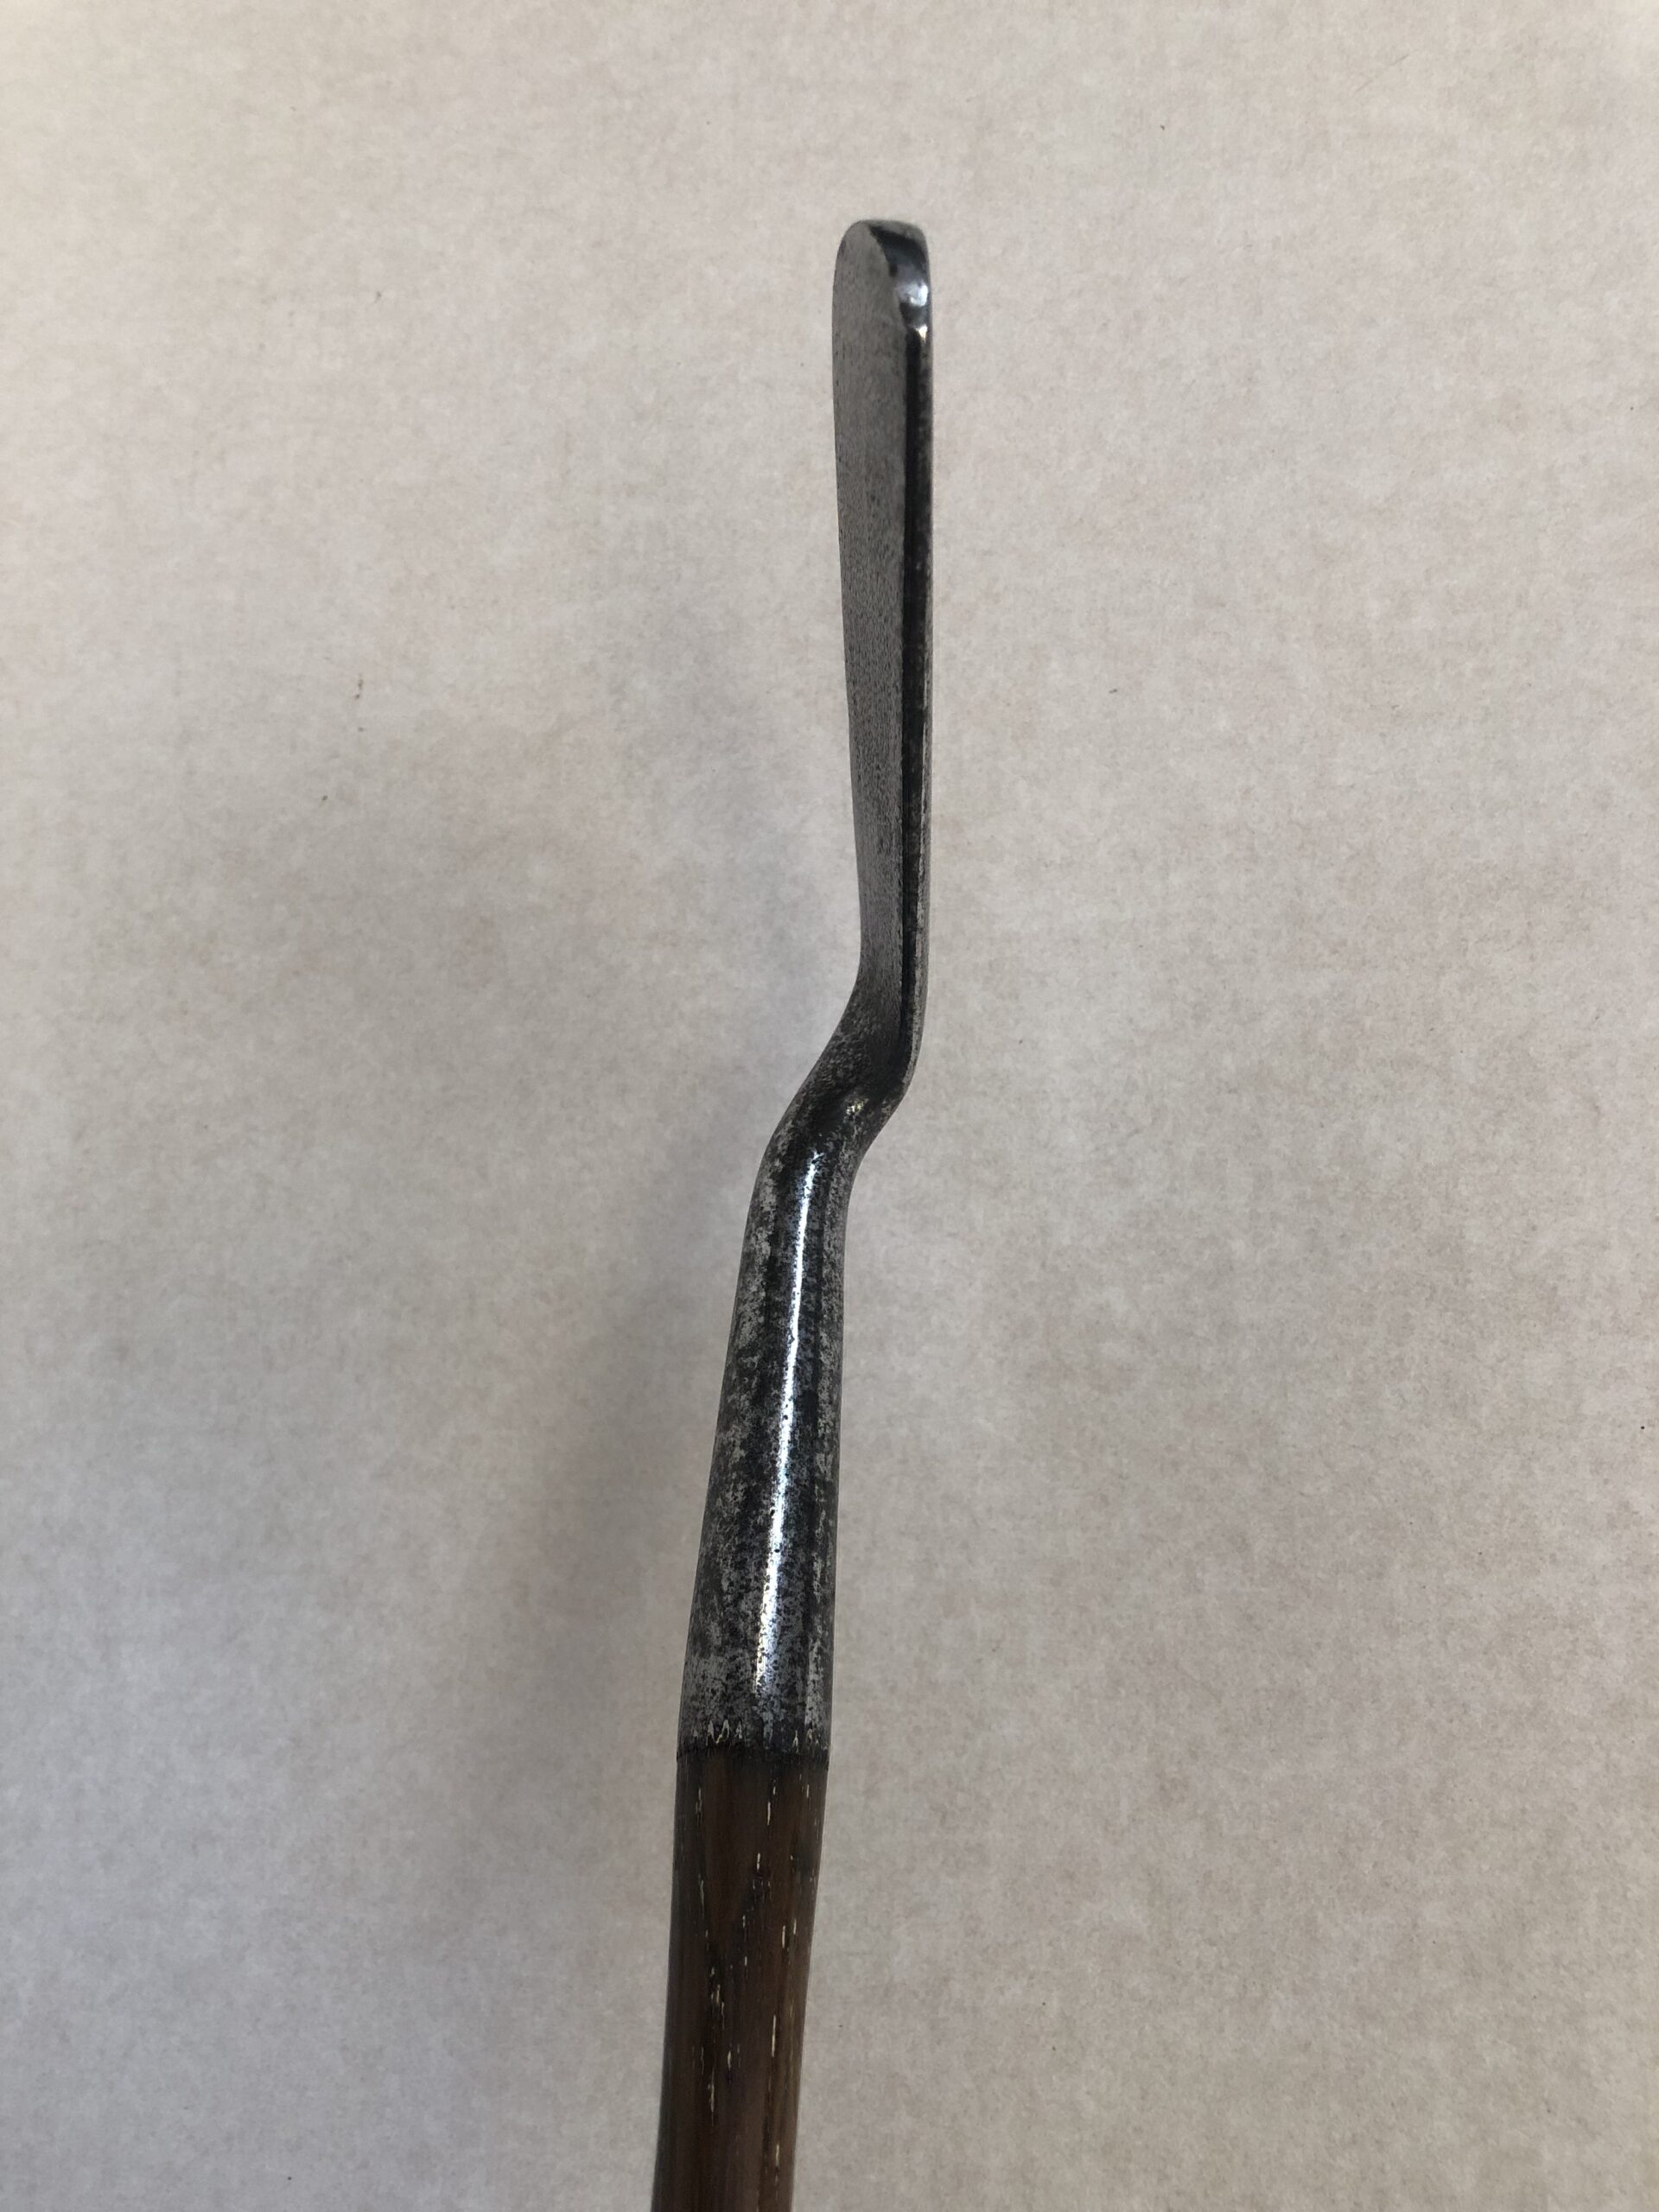 Patent 'Wry-neck' Putter by Willie Park Jr.